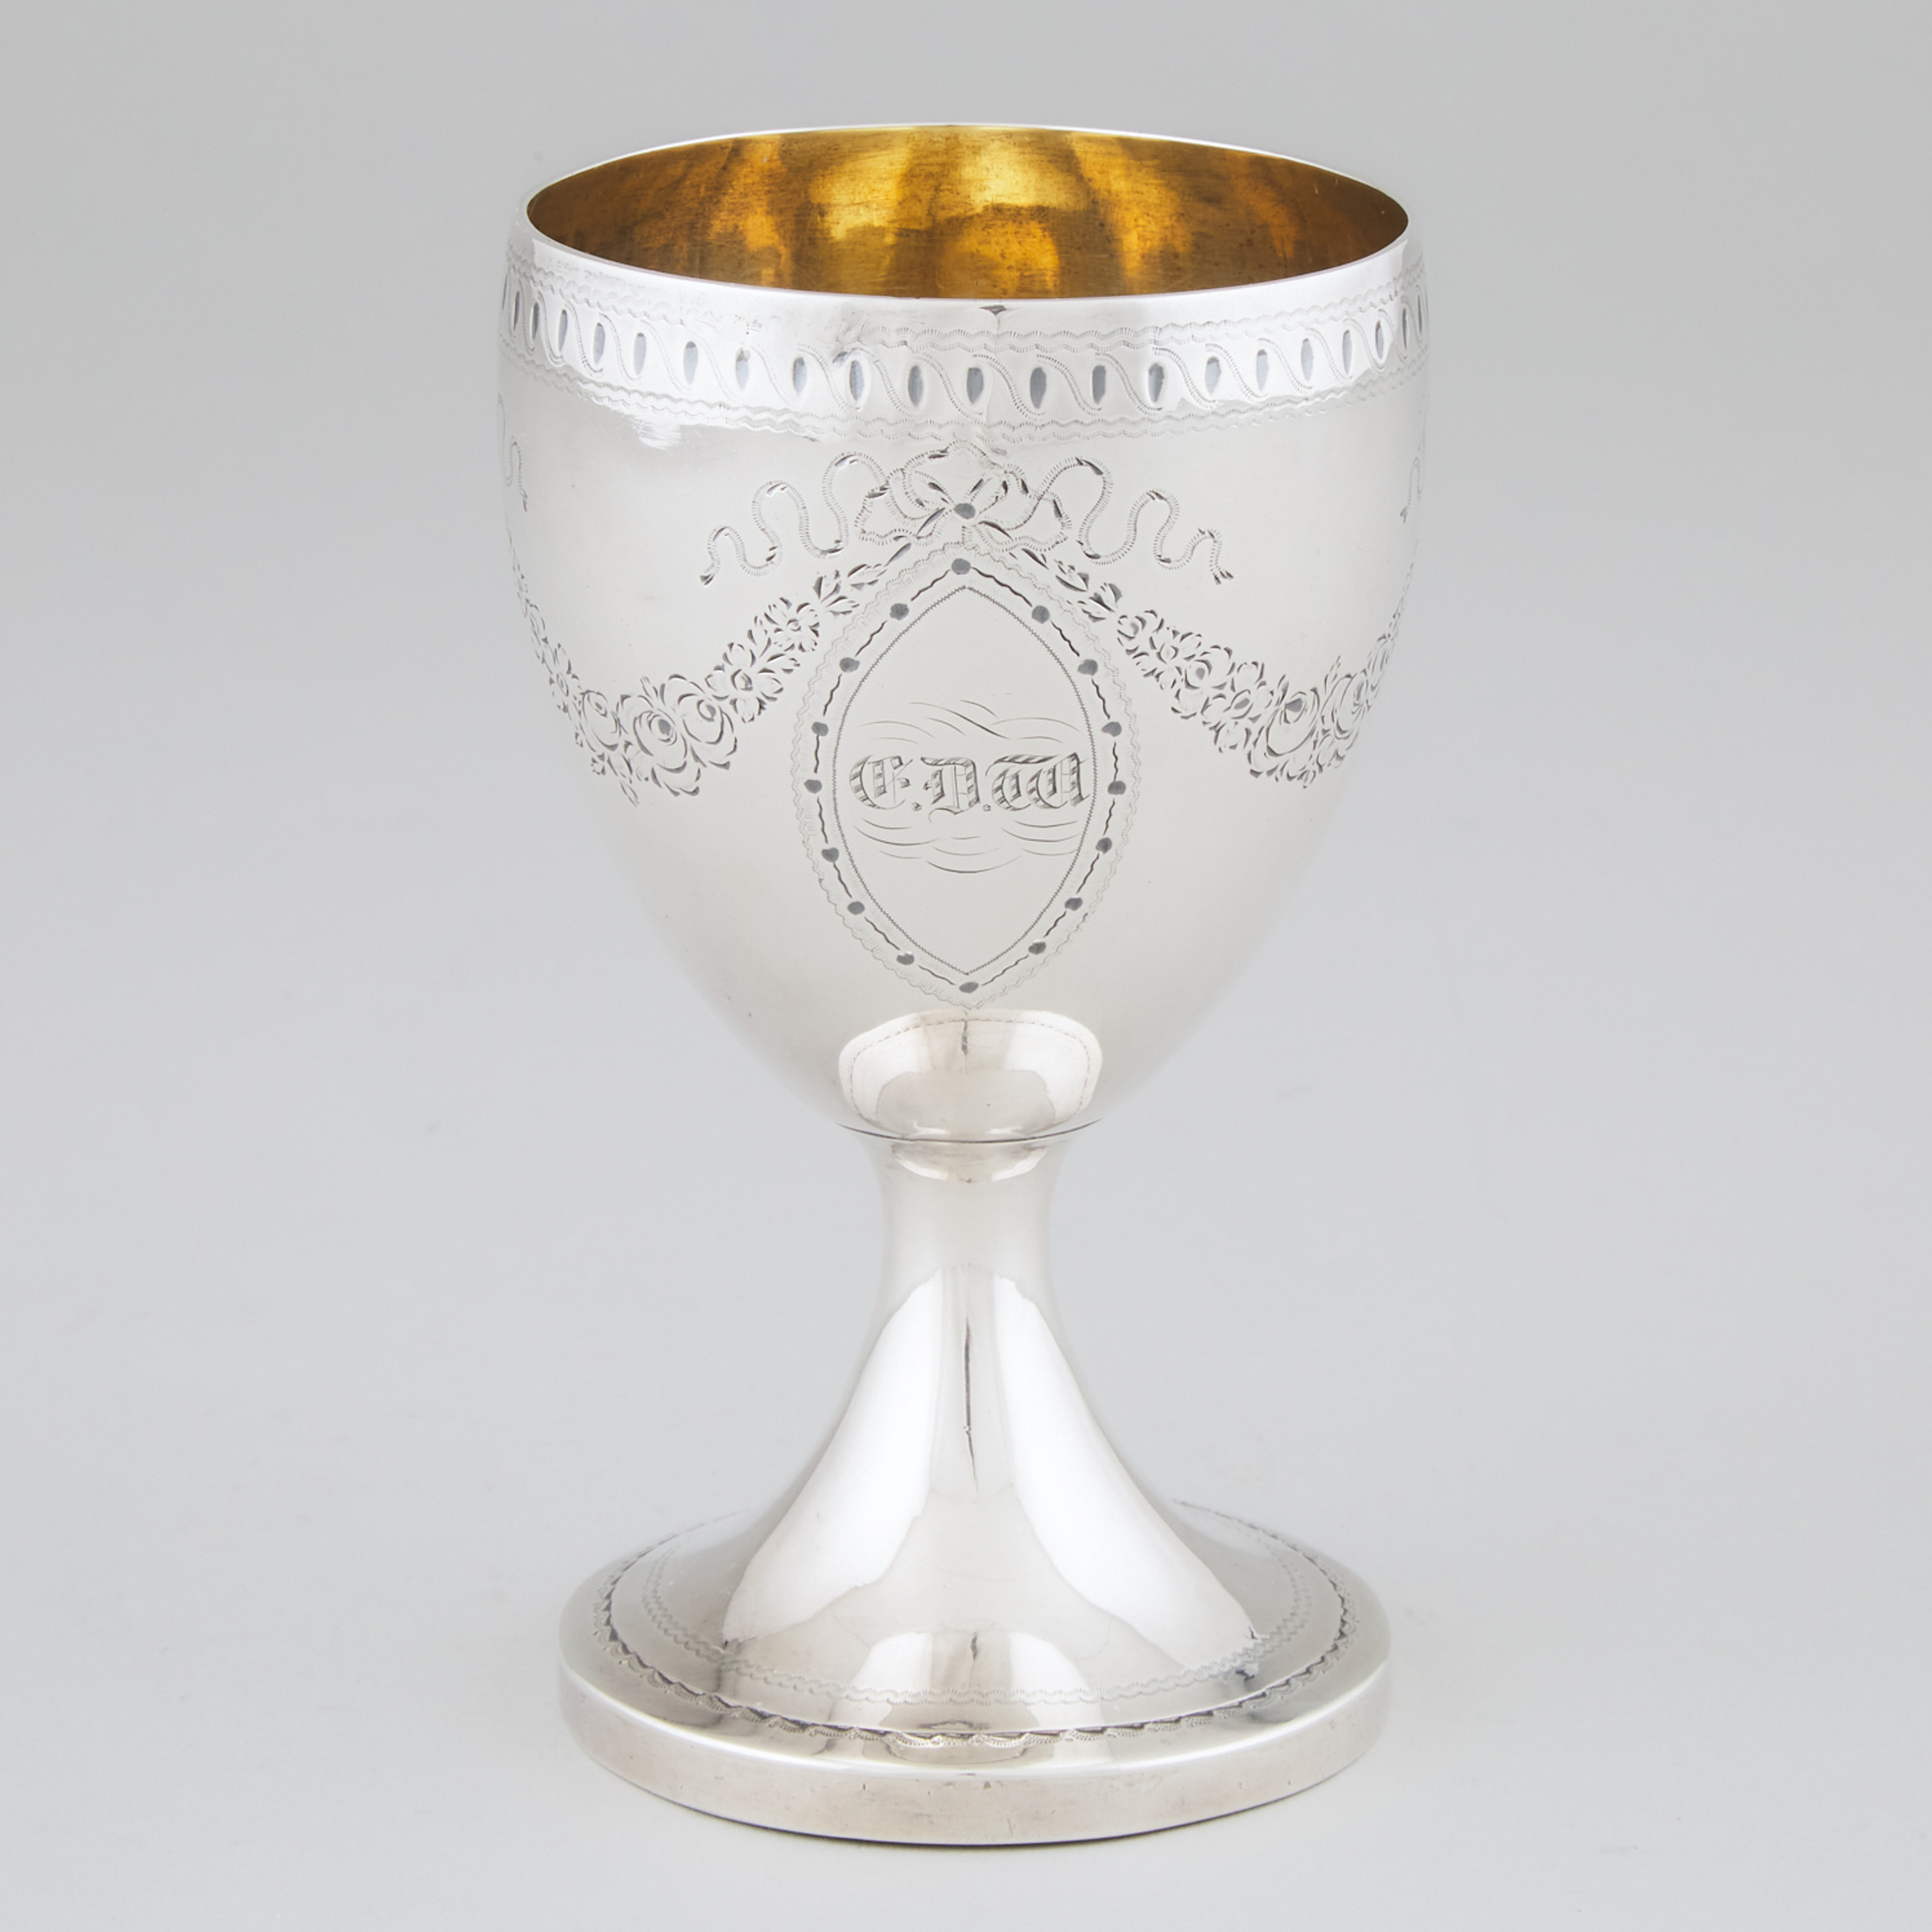 George III Silver Goblet, late 18th